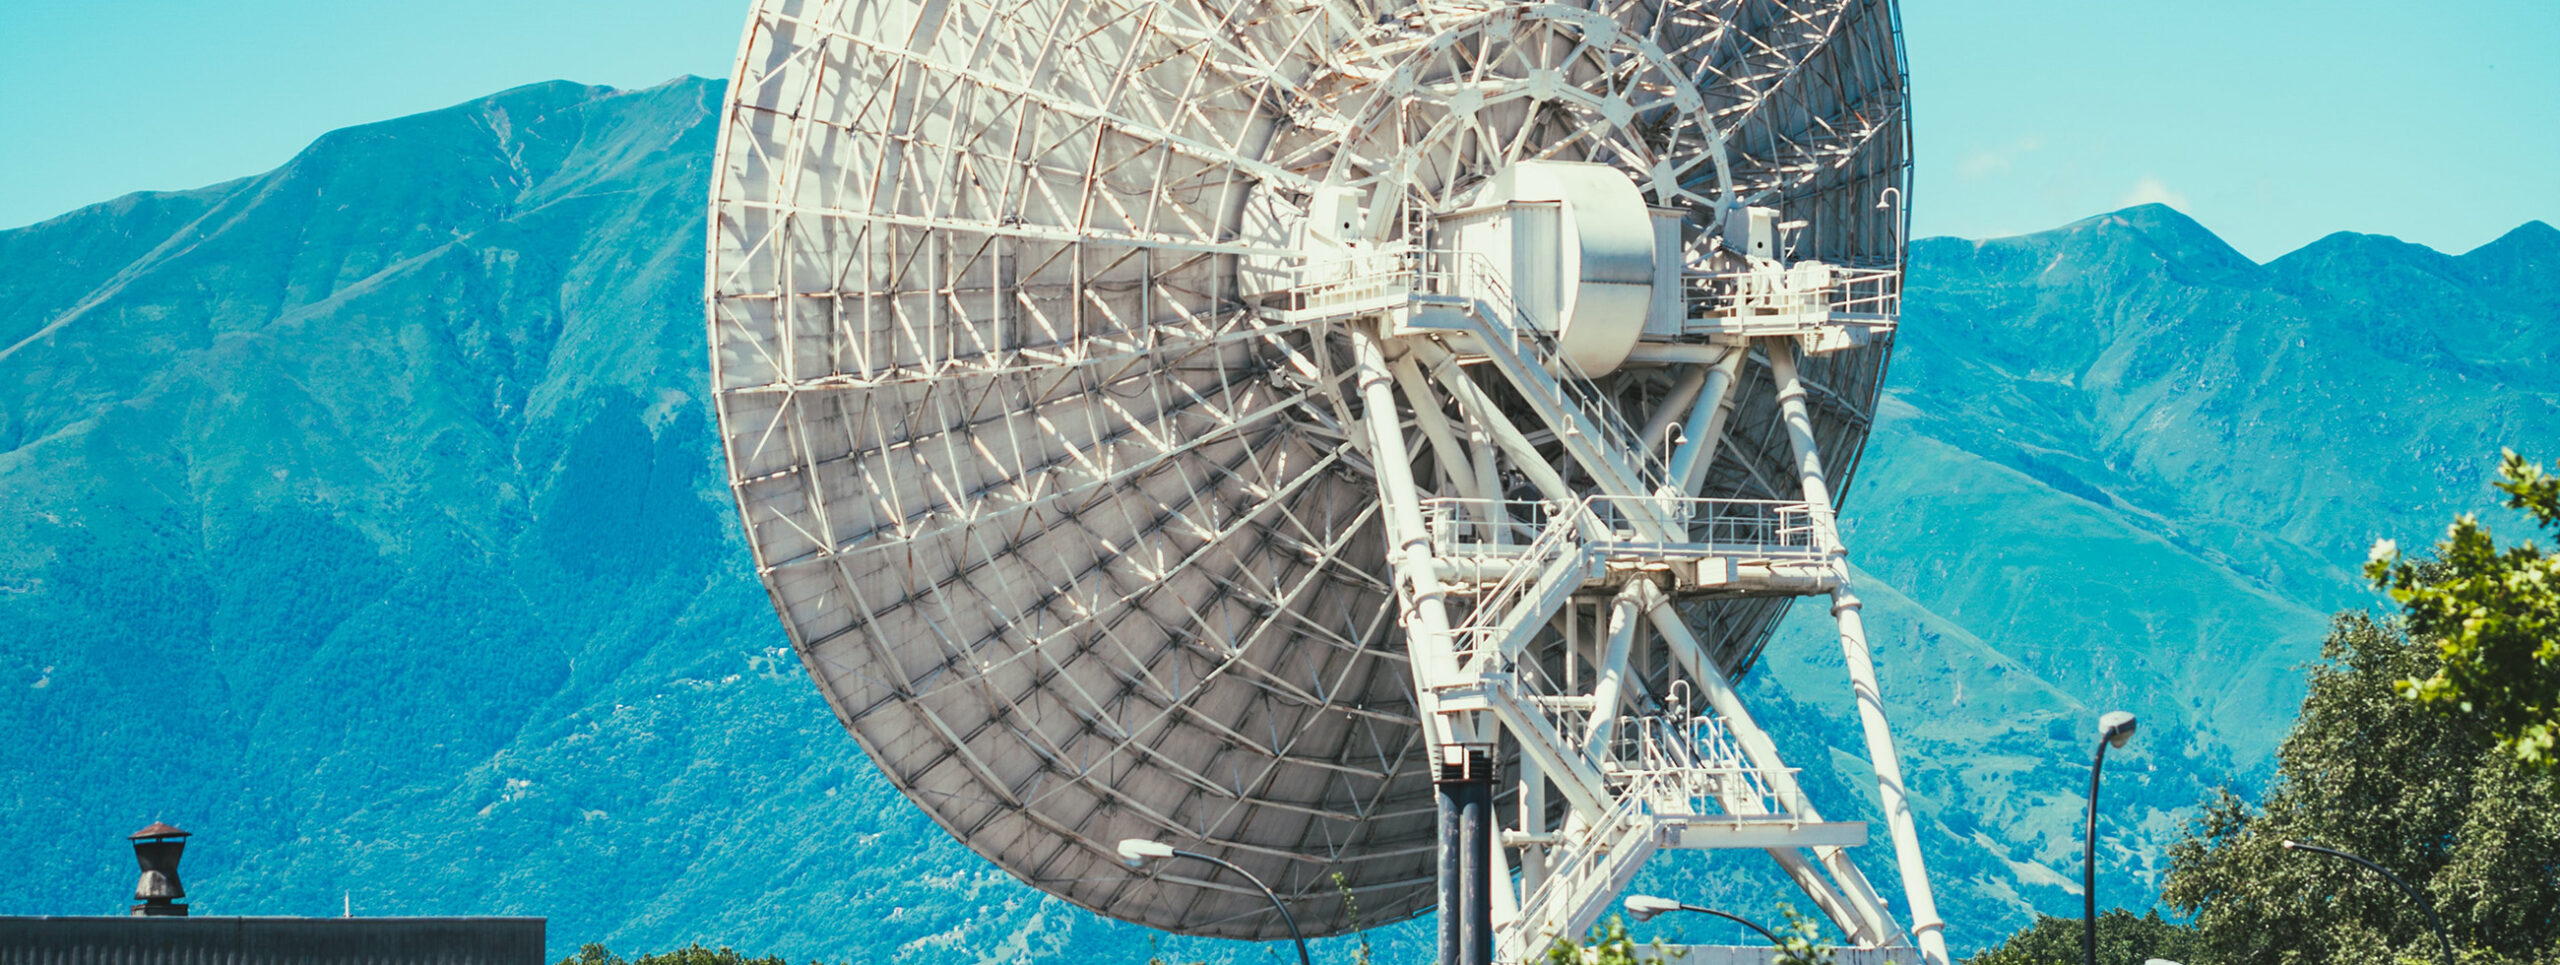 A radar dish in front of mountains